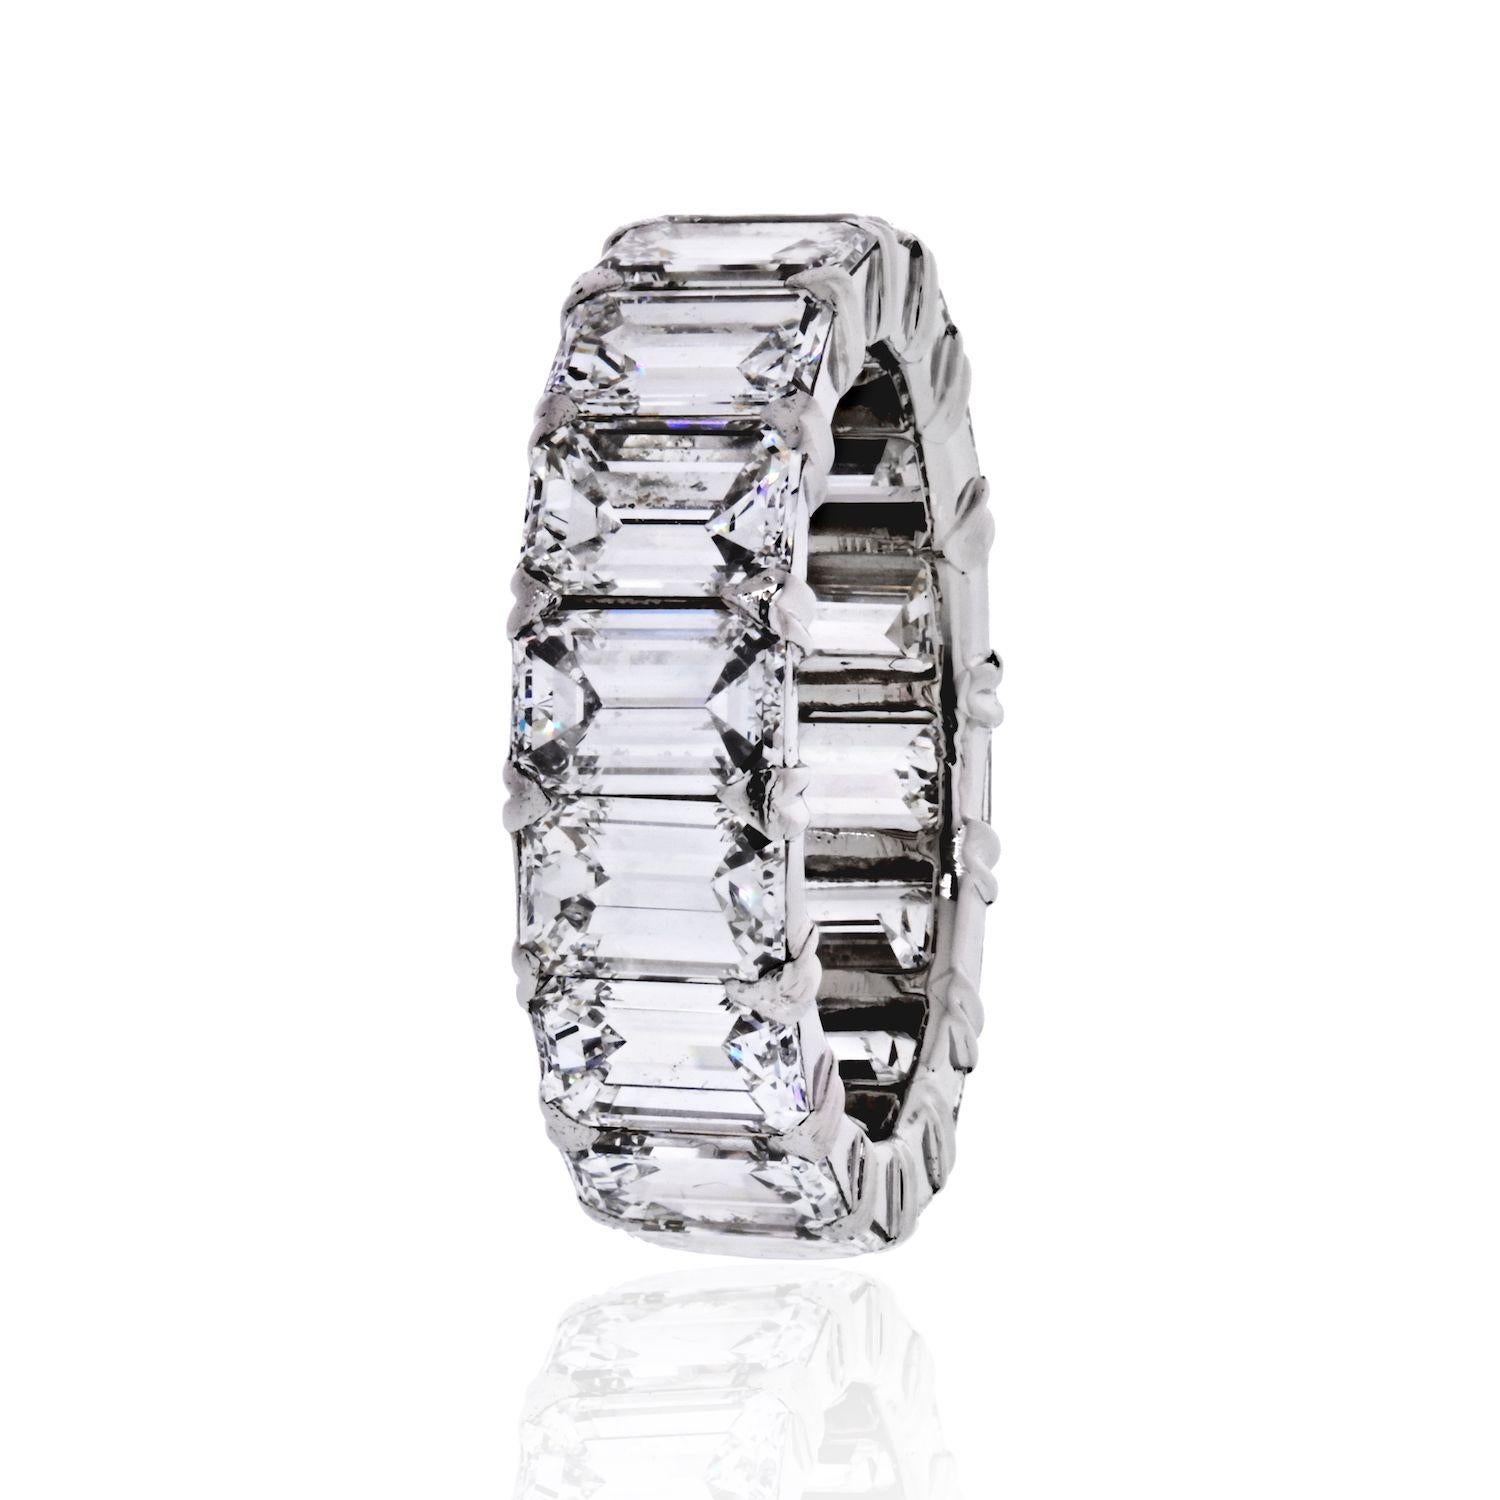 Handmade diamond eternity band crafted with emerald cut diamonds of 6.50cts. 
Low set, close to the finger. Will sit well next to all engagement rings. 
Width: 5.8mm
Finger size 4.5.